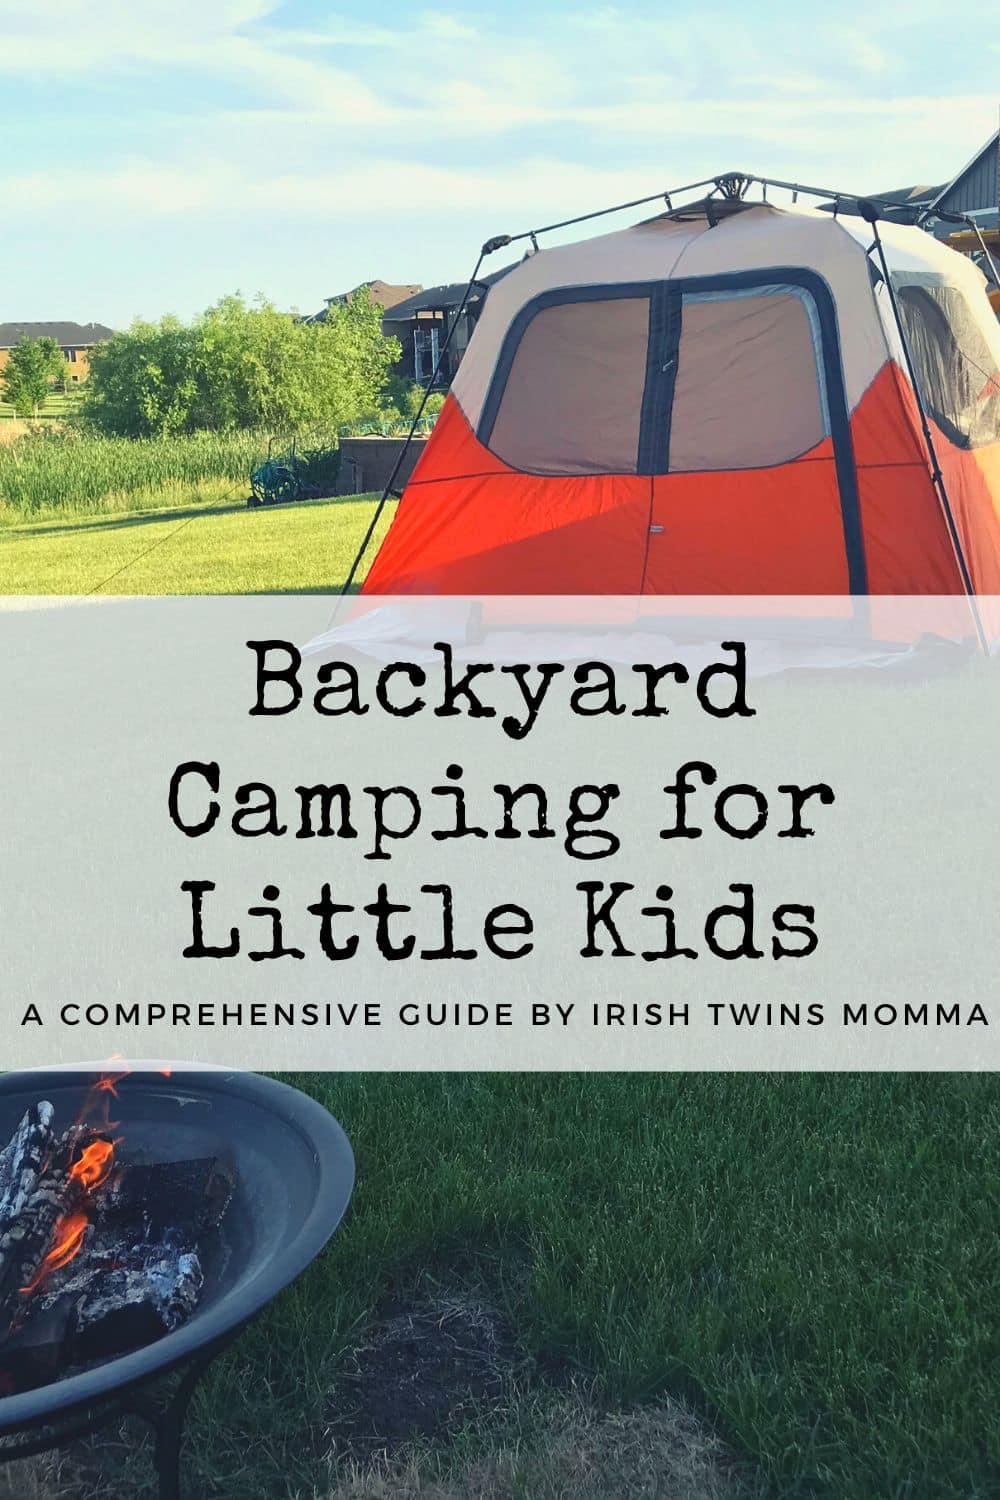 Having a fun backyard campout is one of the first camping experiences for little kids, with all the thrills but none of the scariness and danger of a proper camping trip. Here’s how to plan a fun backyard camping trip for little kids.

Camping in your backyard may not seem very glamorous, but it can be a fun and exciting adventure, especially for little kids. via @irishtwinsmom11